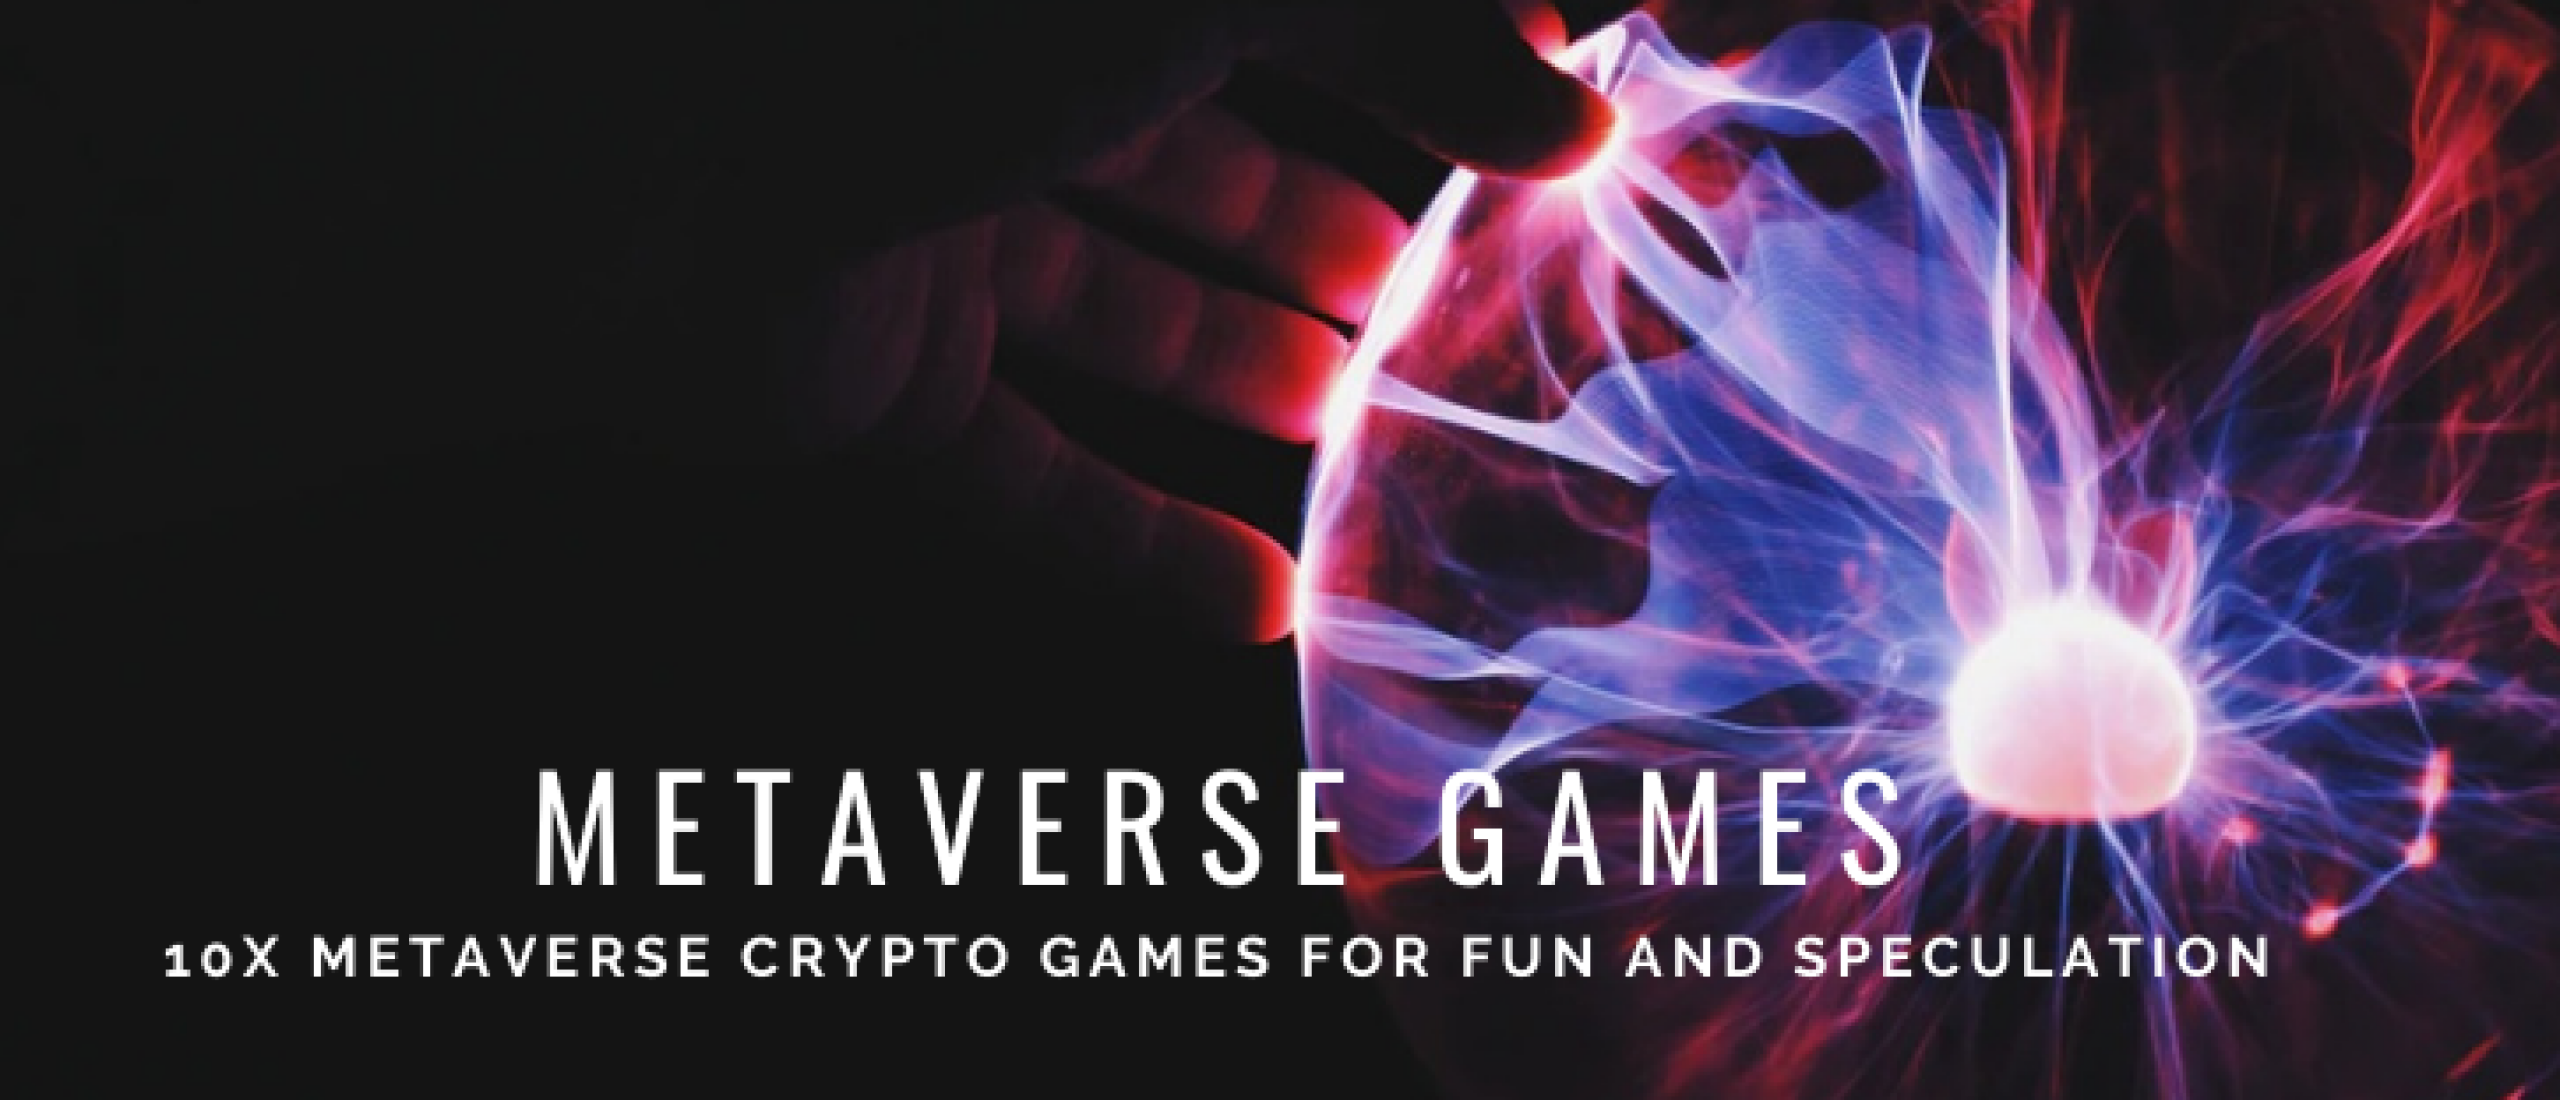 10x Metaverse Crypto Games: Speculative Investing and Fun